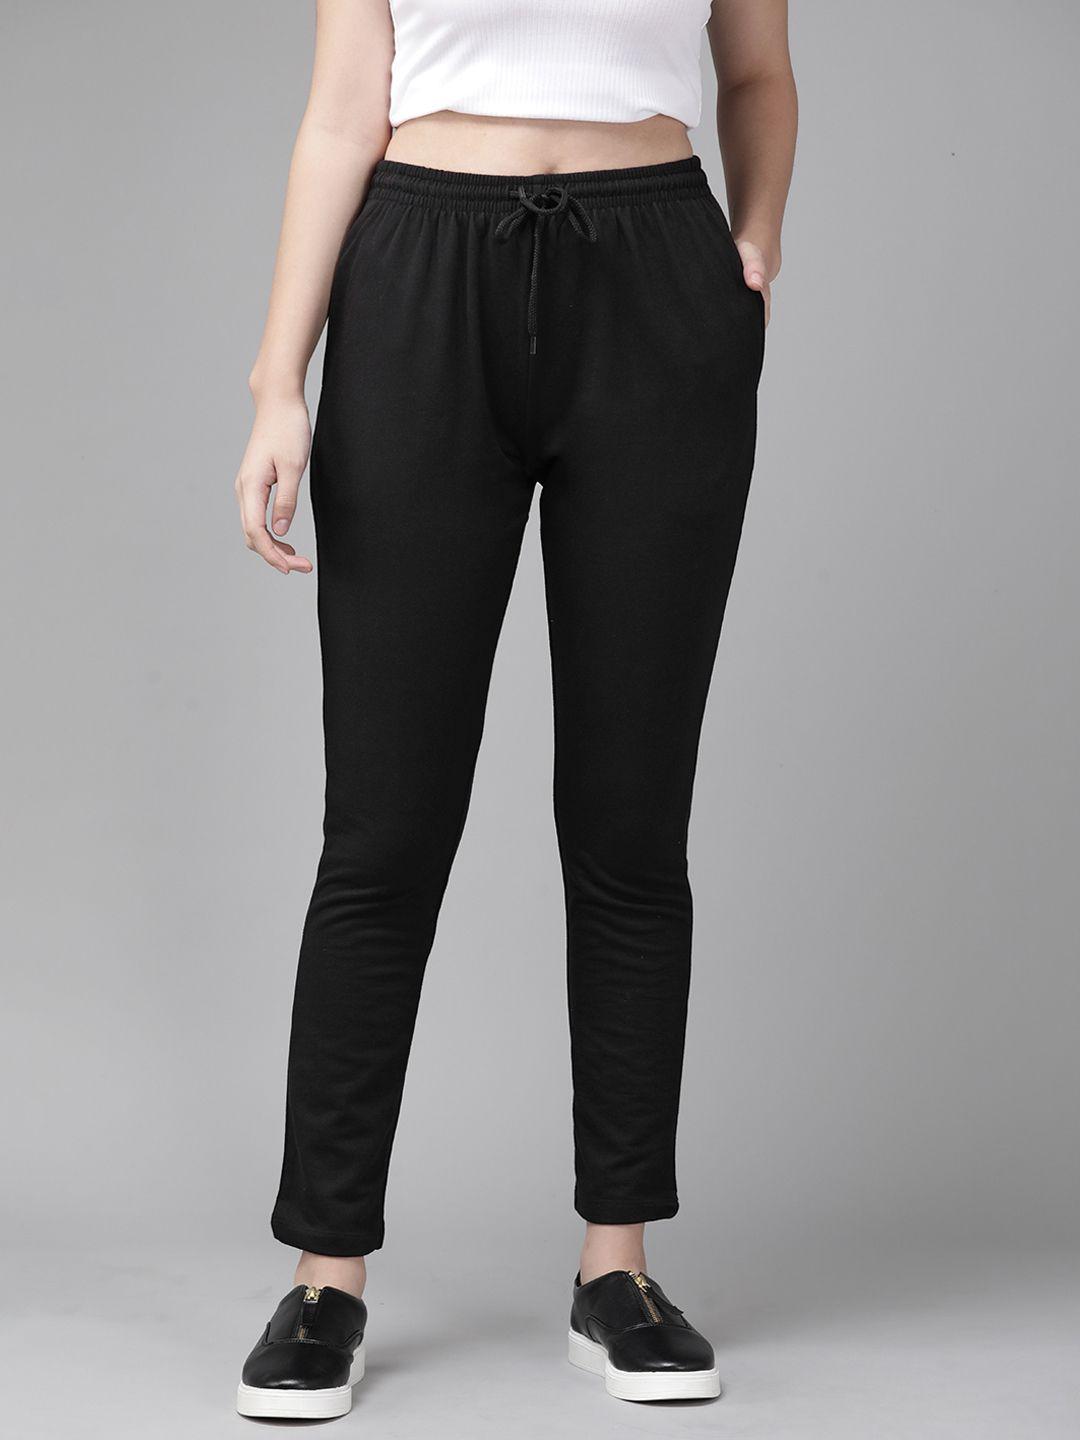 roadster-women-black-solid-cropped-track-pants